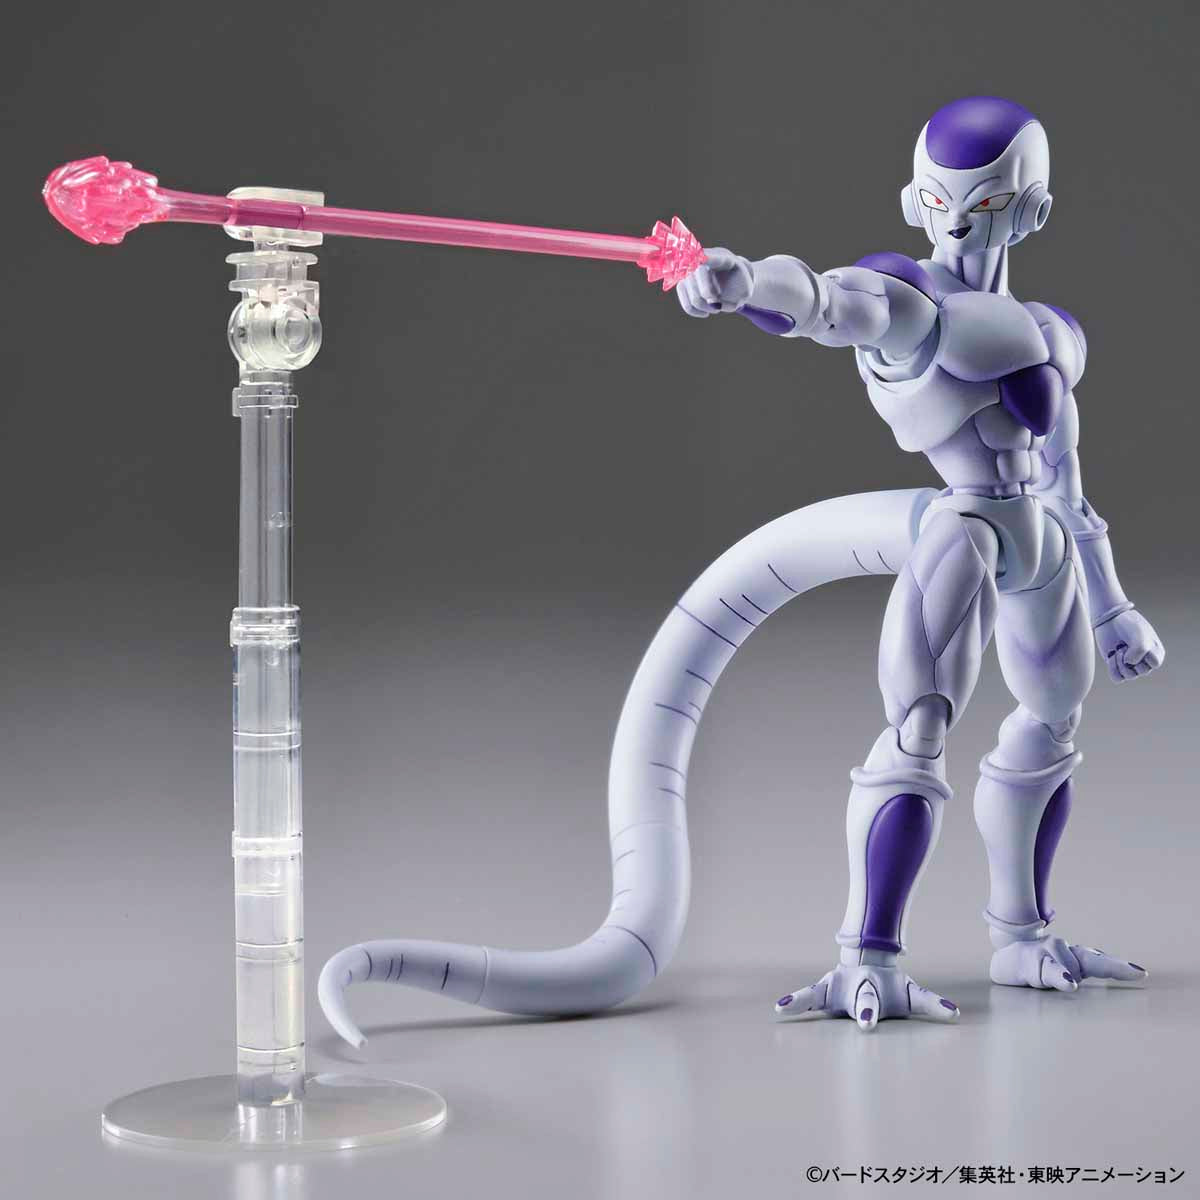 Dragon Ball - Final Form Frieza - Figure-rise Standard Model Kit, Includes Muscle Build System, 3 types of hand parts, Death Ball and Death Beam effects, 2 face expressions, and foil stickers, Nippon Figures